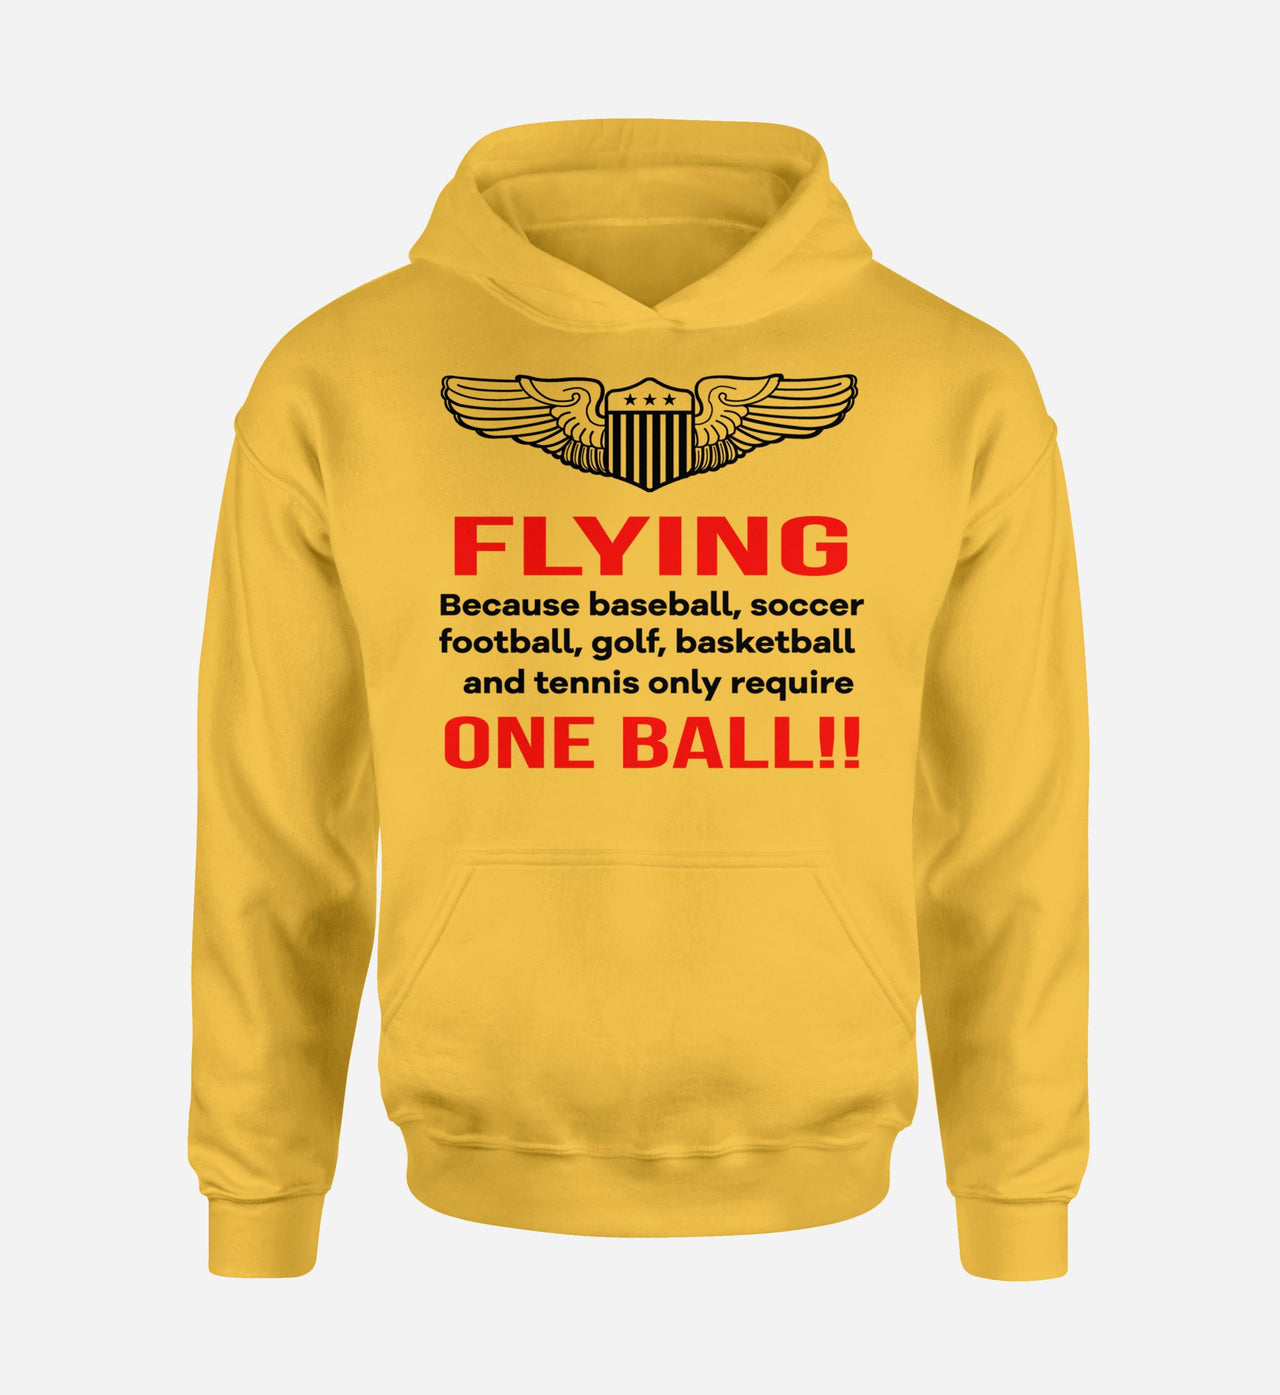 Flying One Ball Designed Hoodies